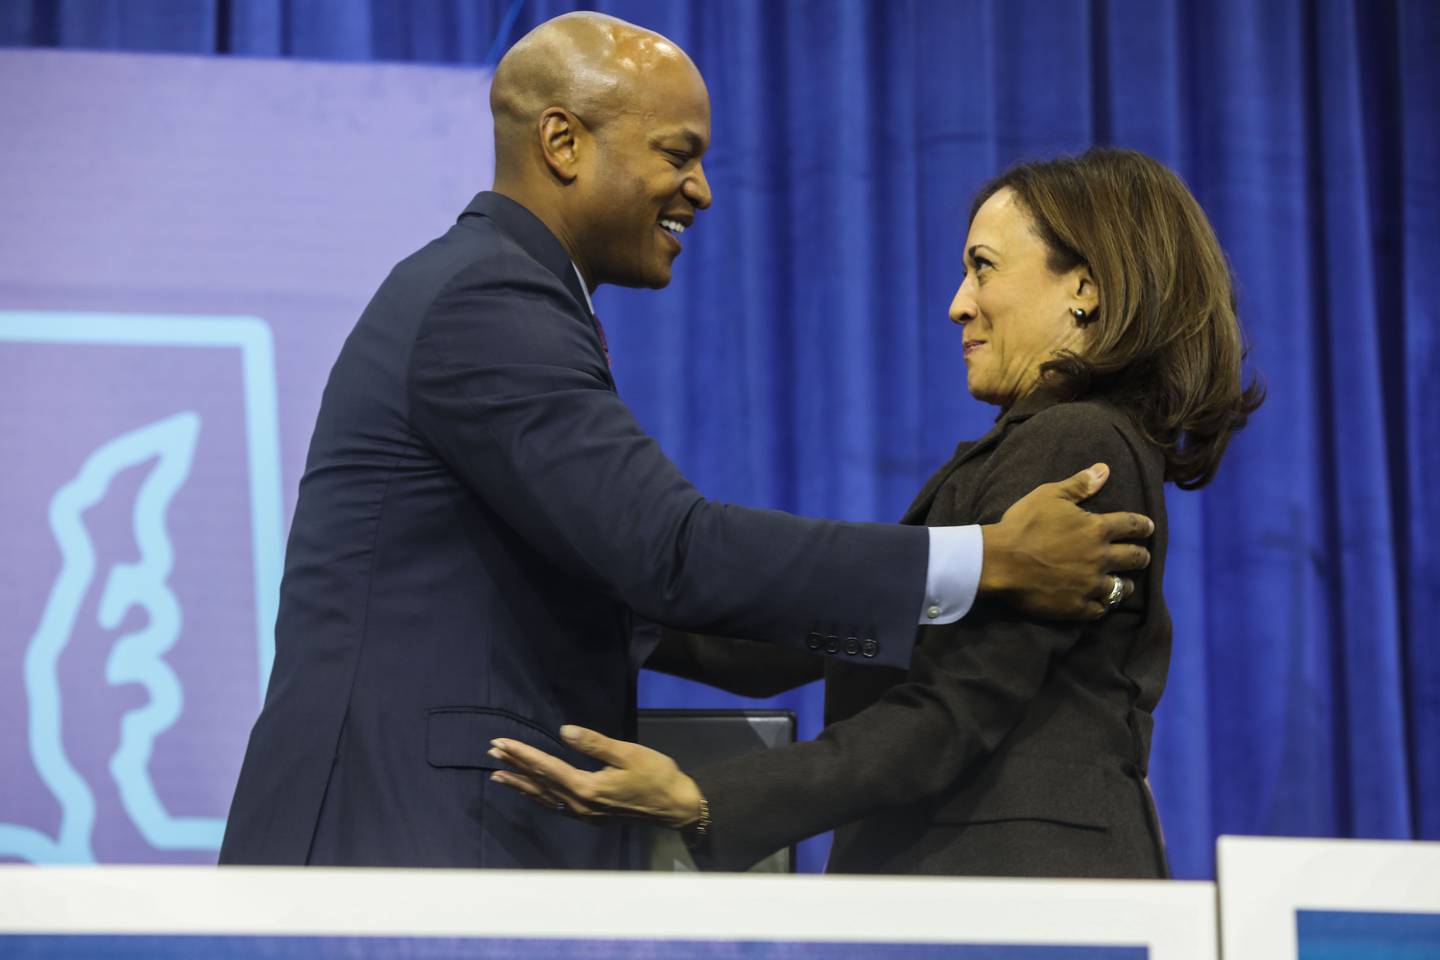 Kamala Harris and Wes Moore embrace in front of a blue background.